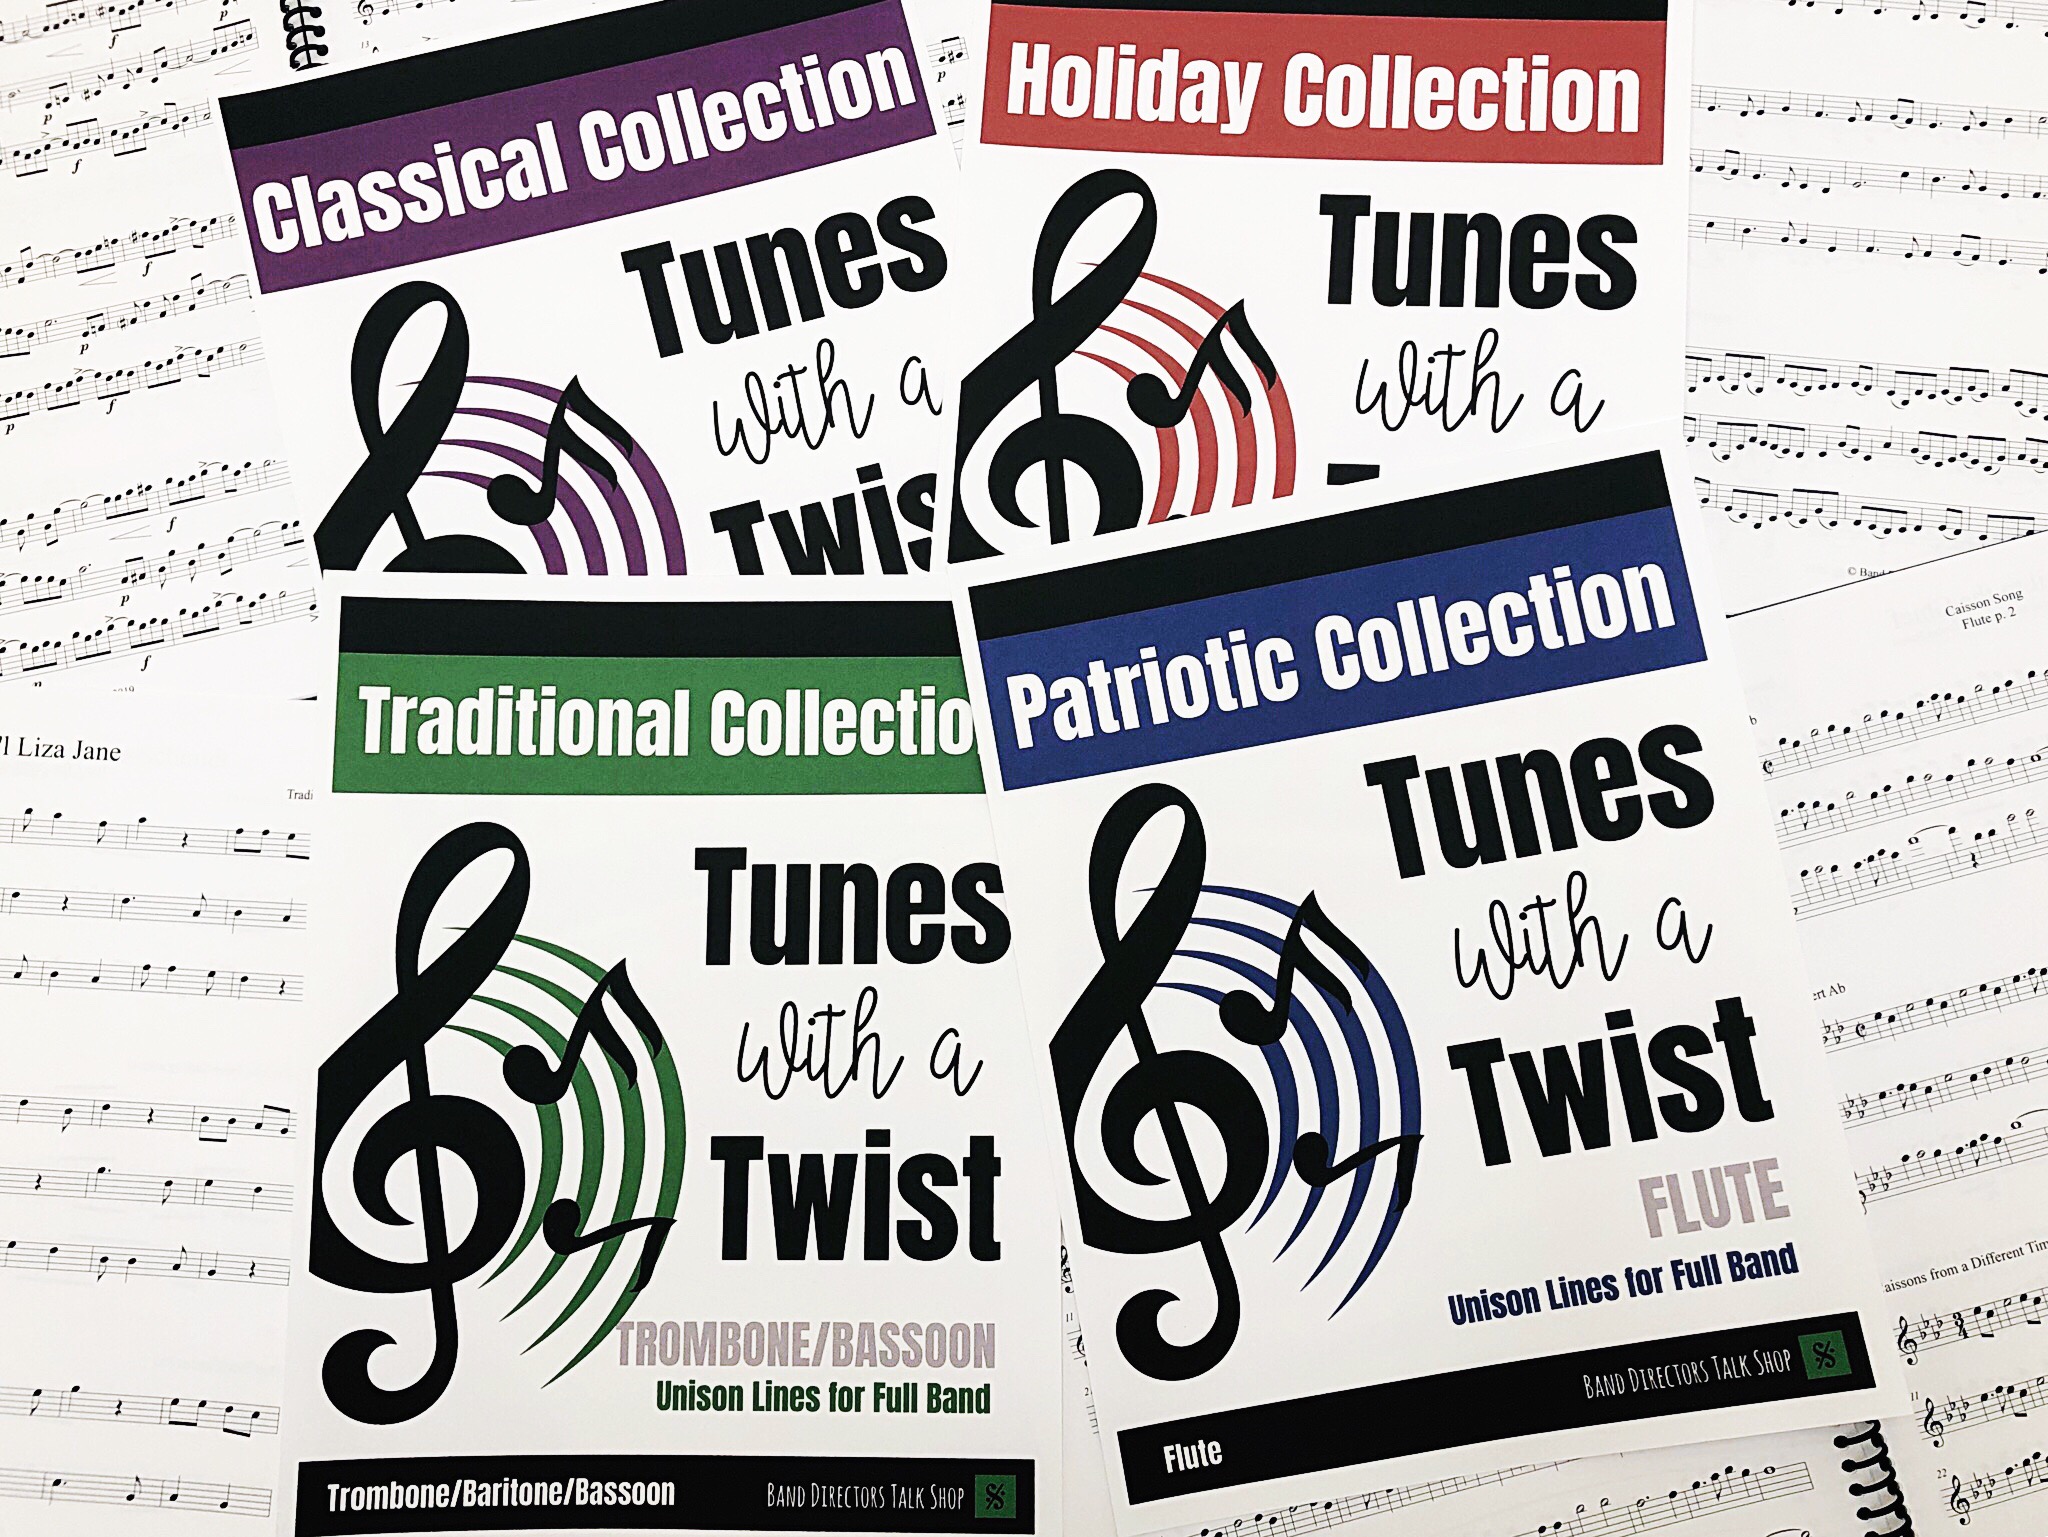 Tunes with a Twist – Unison Lines for Full Band